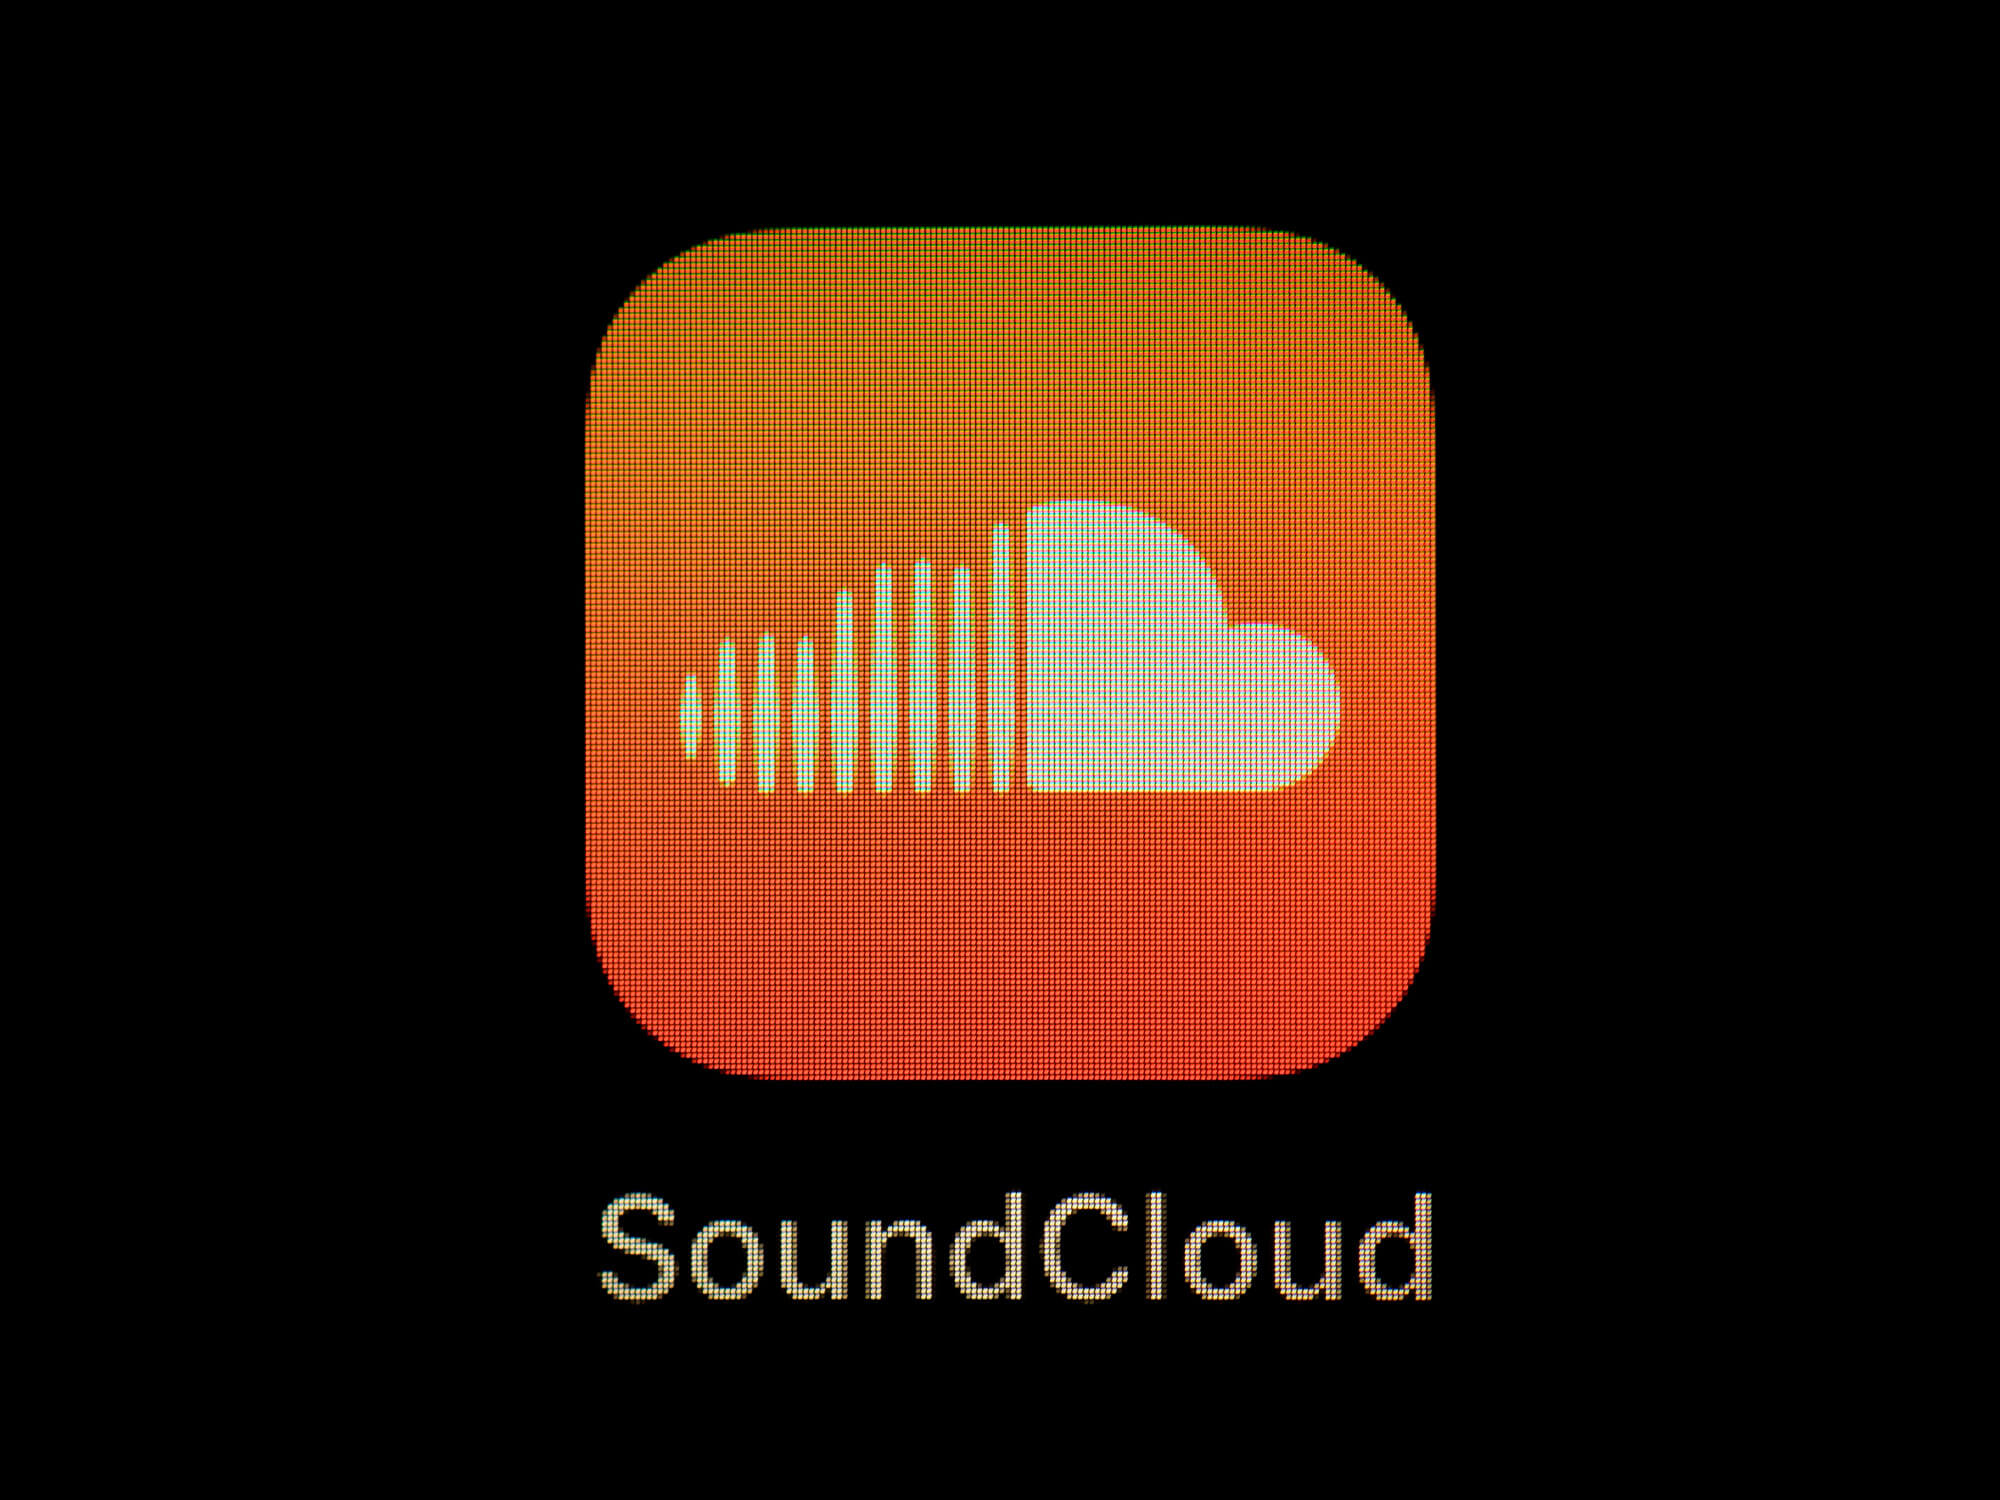 The SoundCloud logo - an orange square with a white cloud shape on it - shown on a computer screen